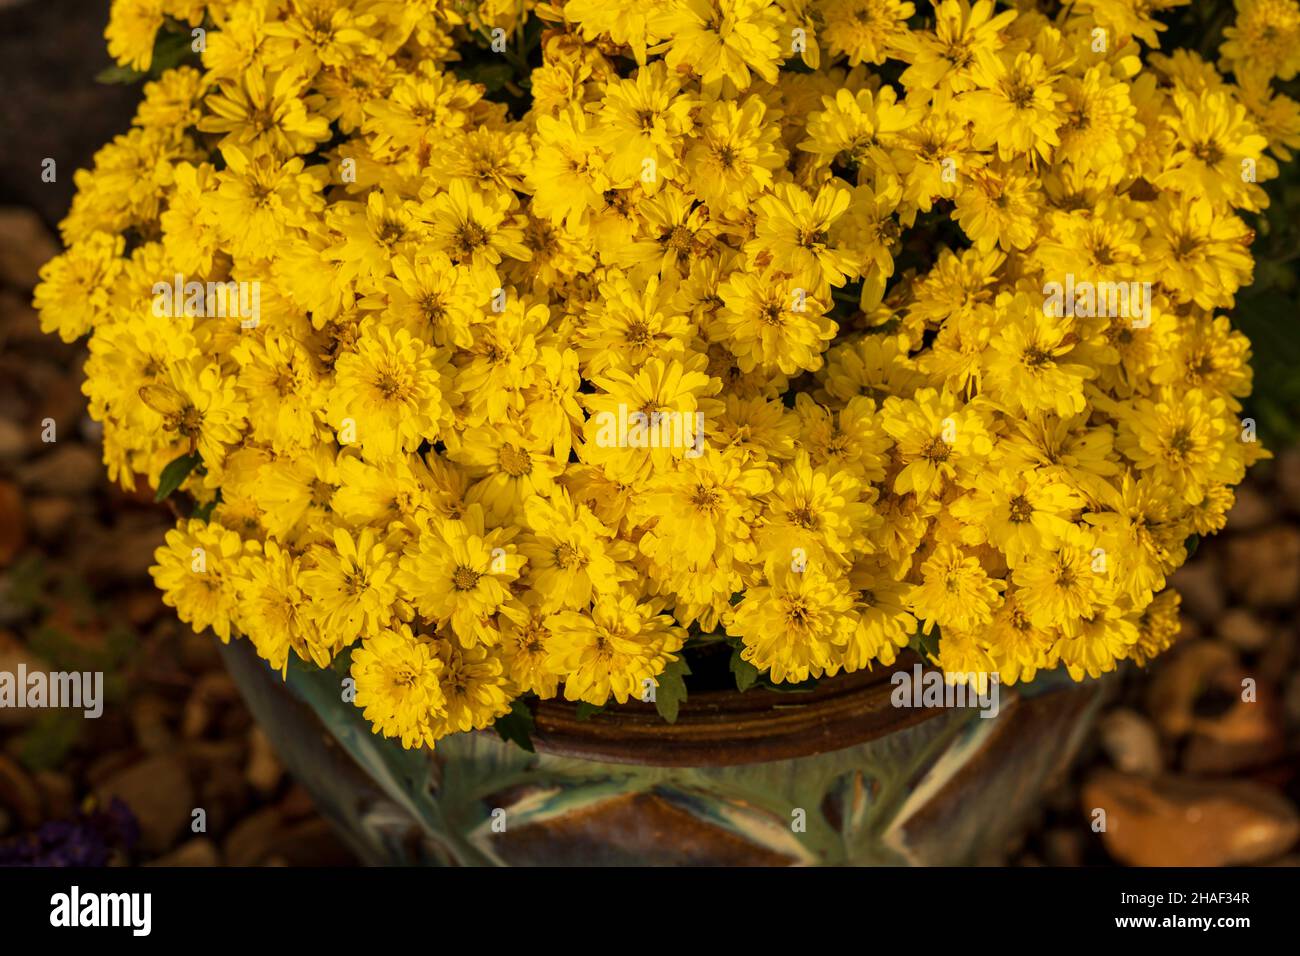 A green and brown ceramic pot holding yellow chrysanthemums in full bloom in autumn. USA. Stock Photo